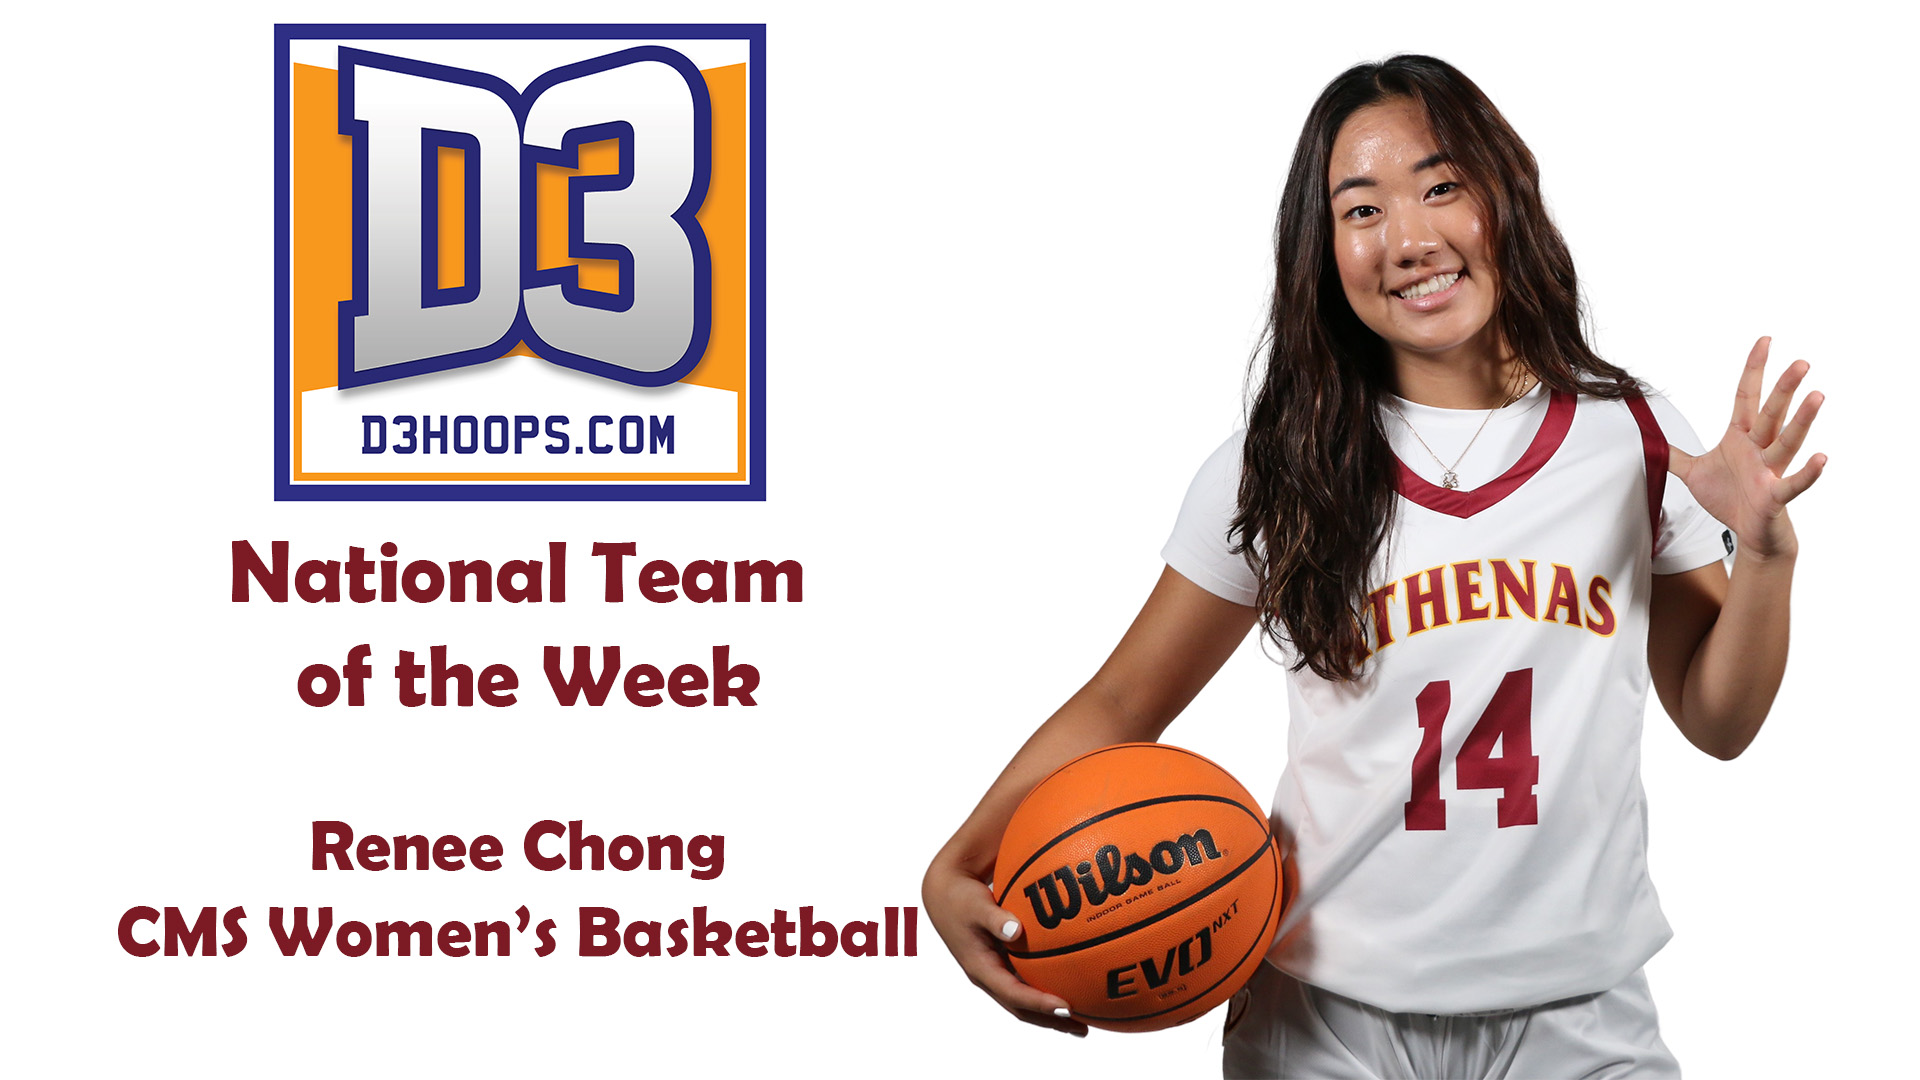 Posed shot of Renee Chong with D3hoops logo